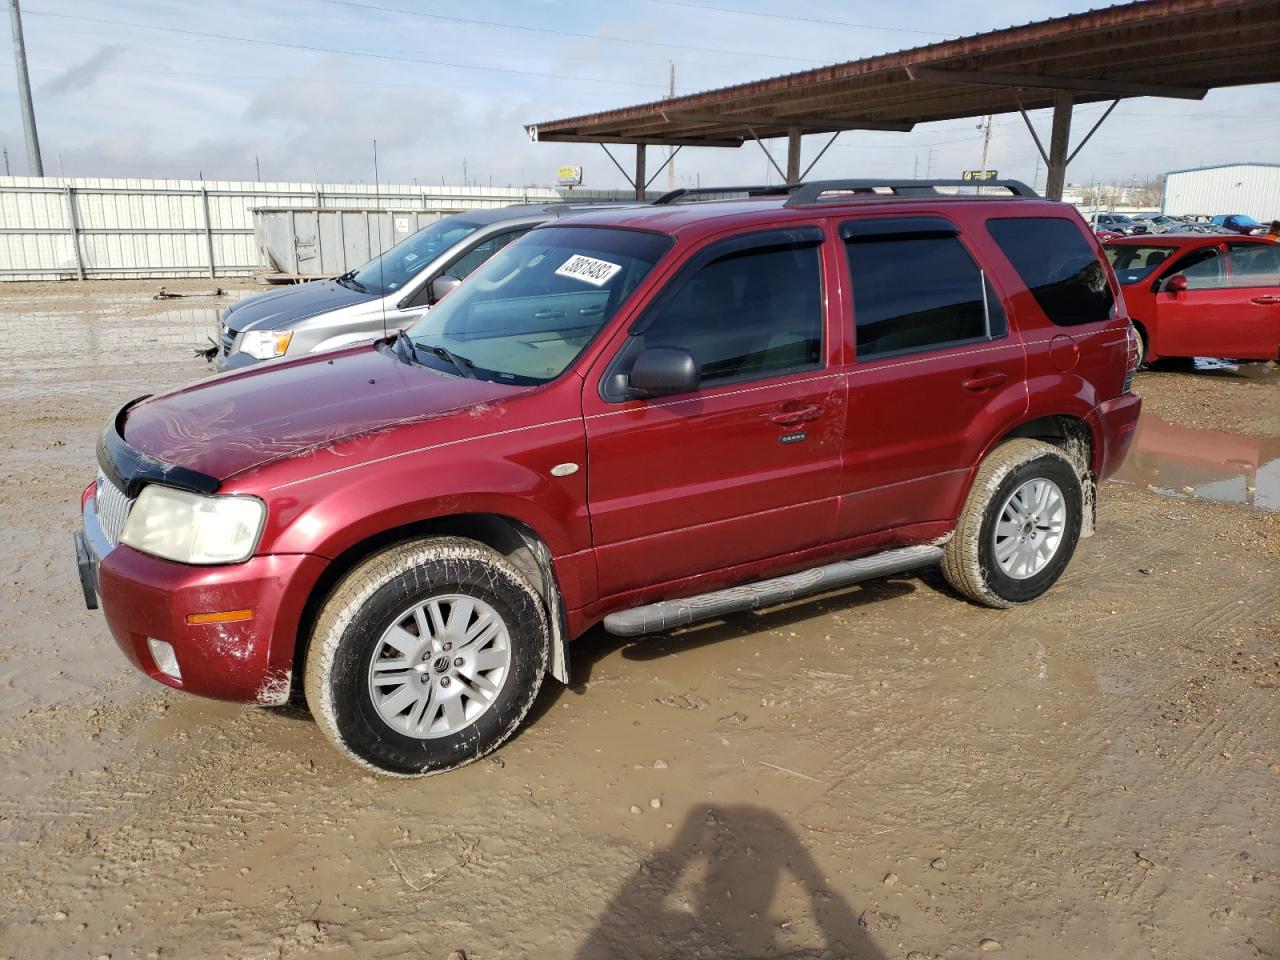 2005 Mercury Mariner for sale at Copart Temple, TX. Lot #38818*** |  SalvageAutosAuction.com